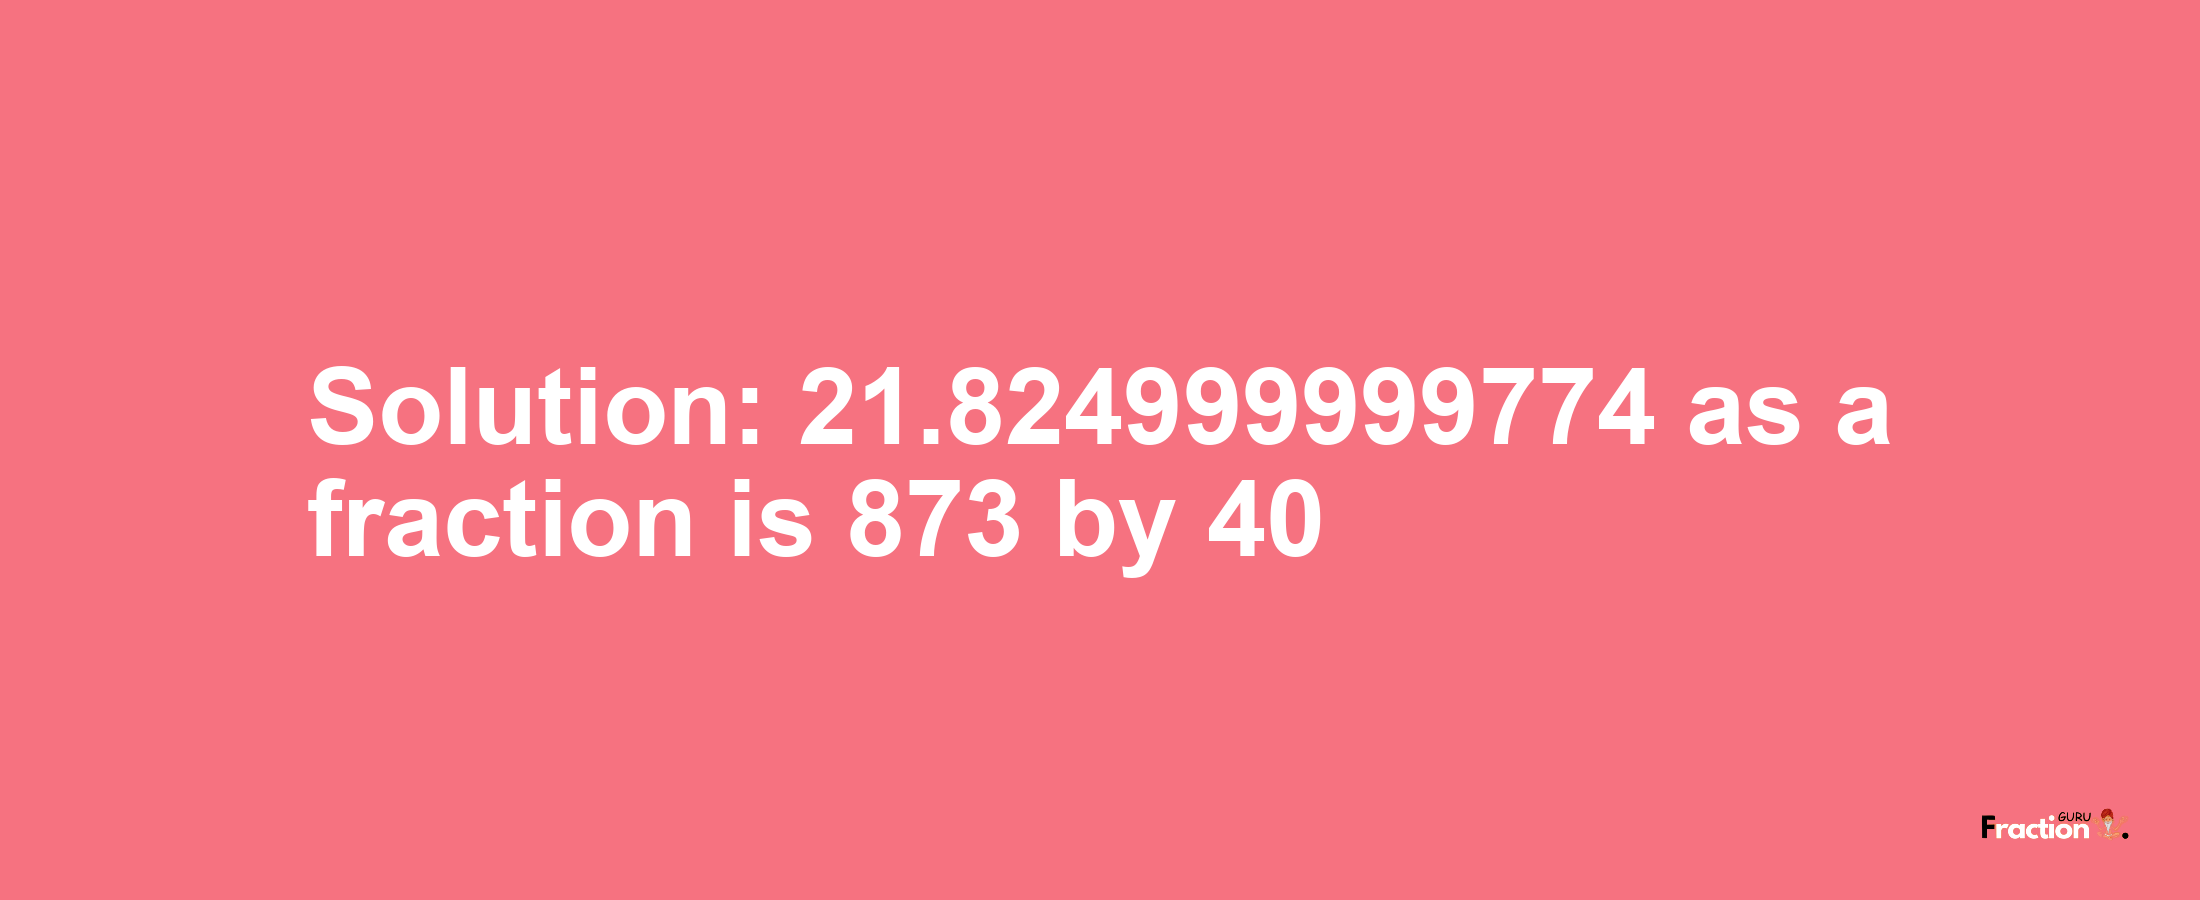 Solution:21.824999999774 as a fraction is 873/40